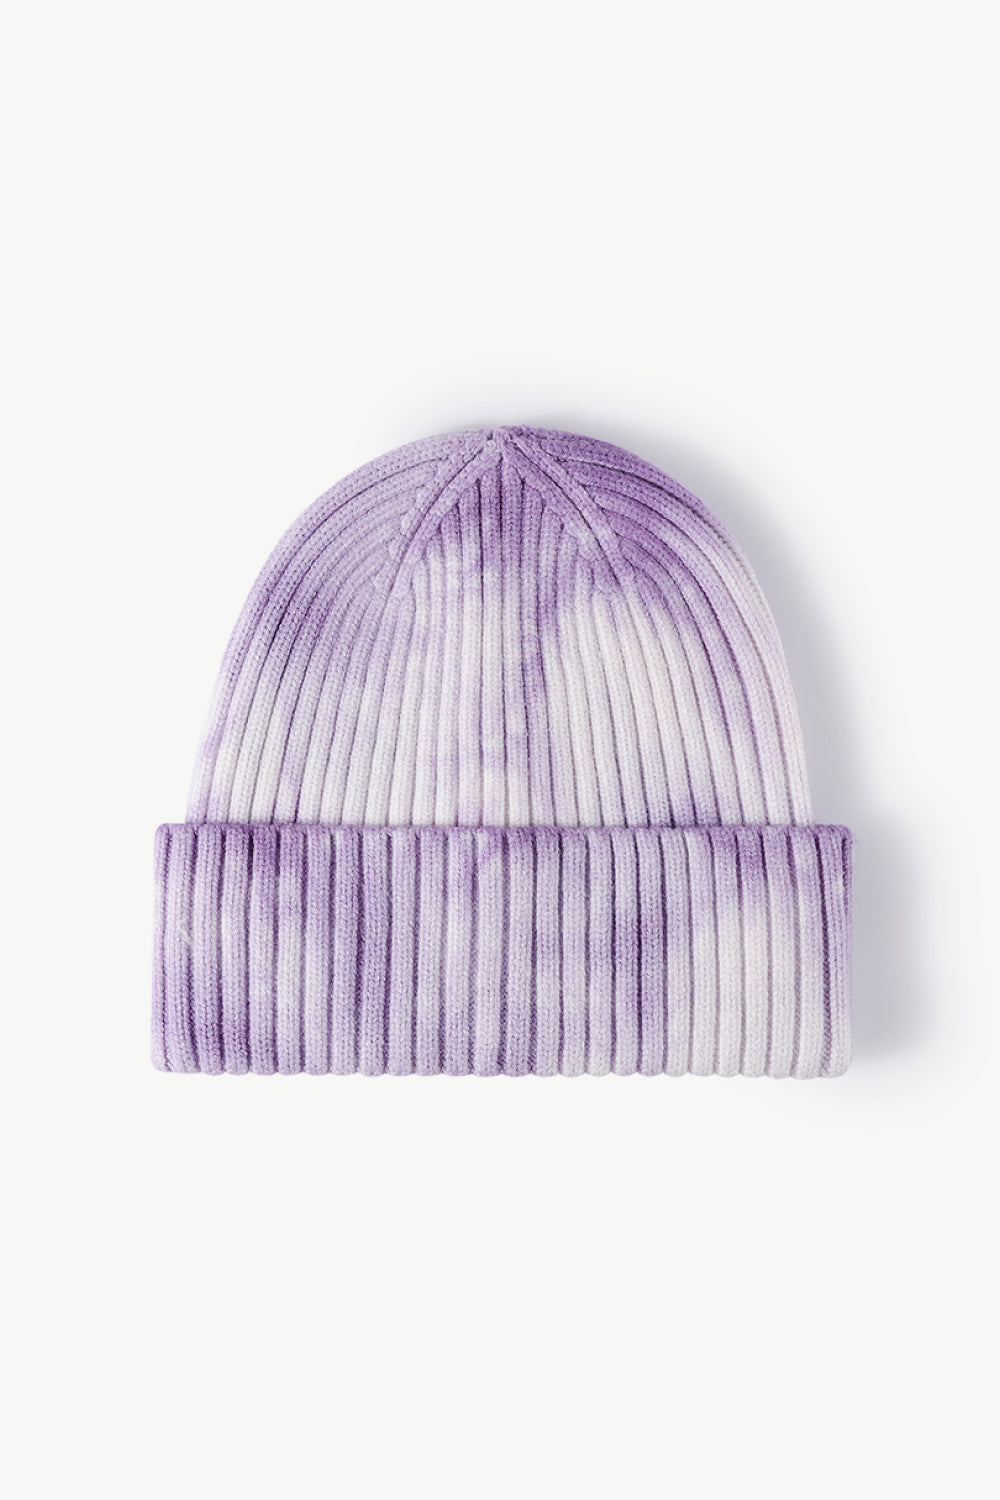 Lavender Tie-Dye Ribbed Cuffed Beanie Sentient Beauty Fashions *Accessories